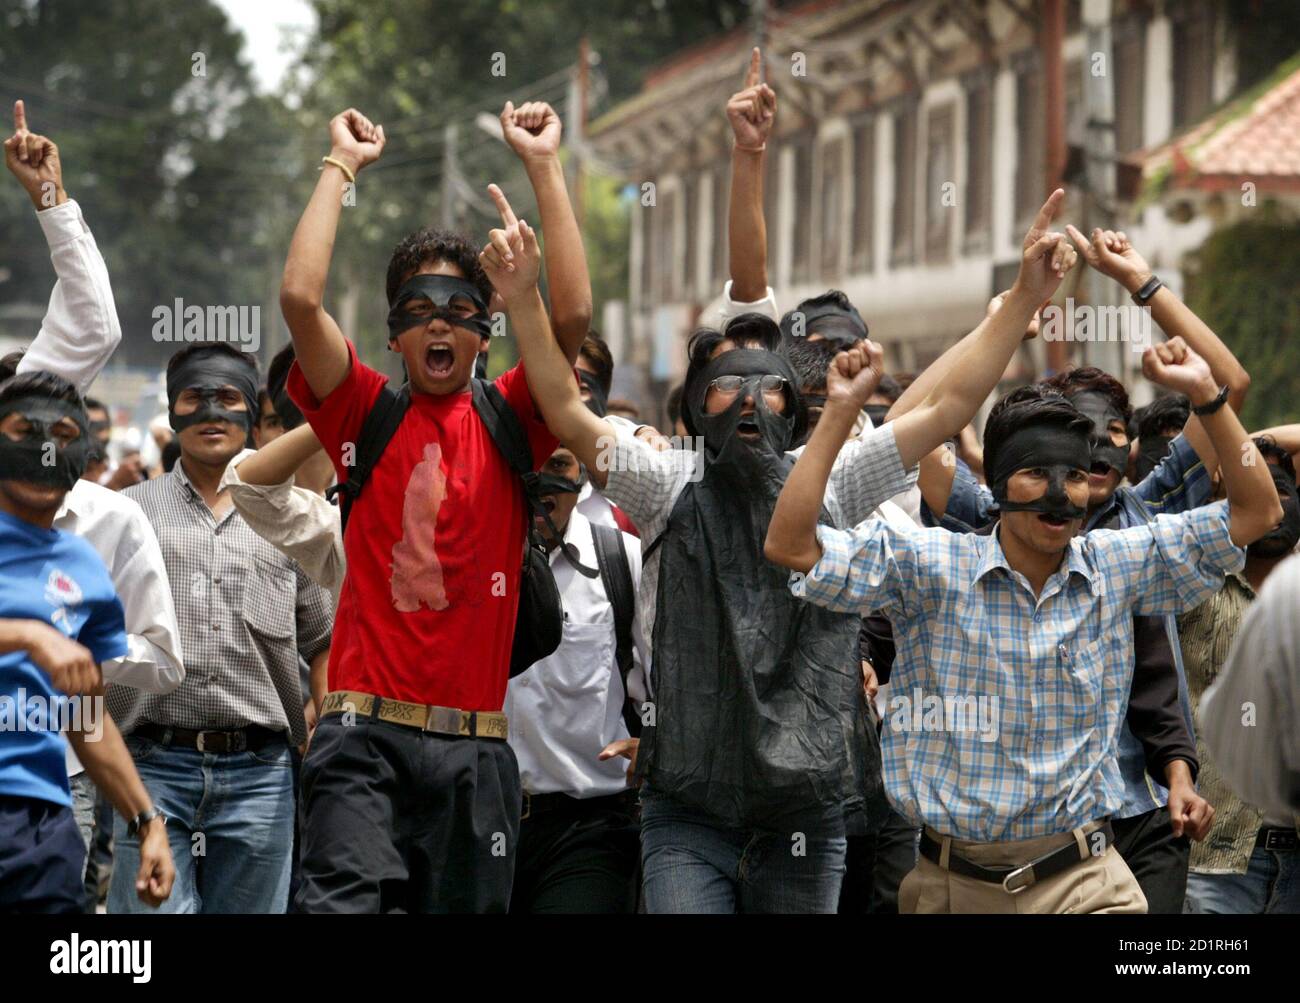 Nepali students shout anti-monarchist slogans while demanding reduction in price of petroleum products in Kathmandu.  Nepali students shout anti-monarchist slogans while demanding a reduction in the price of petroleum products in Nepal's capital Kathmandu August 28, 2005. Students from several campuses belonging to seven political parties took party in a protest rally, wearing black masks. REUTERS/Gopal Chitrakar Stock Photo